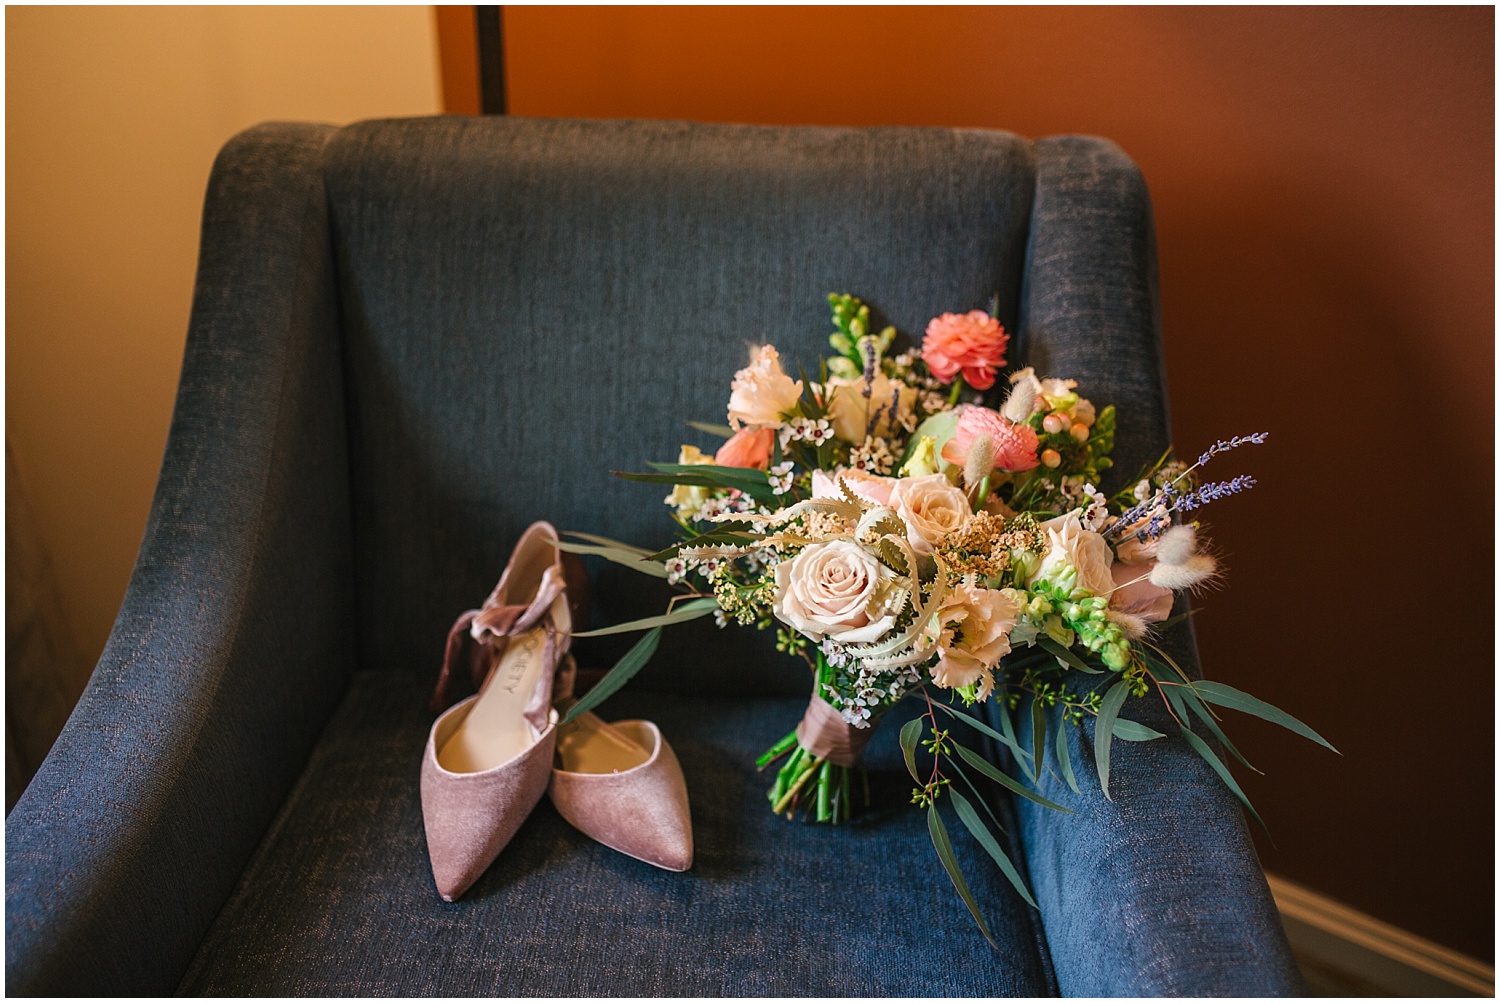 Shoes and bridal bouquet by Florecita Flowers at Hyatt Regency Tamaya wedding in New Mexico